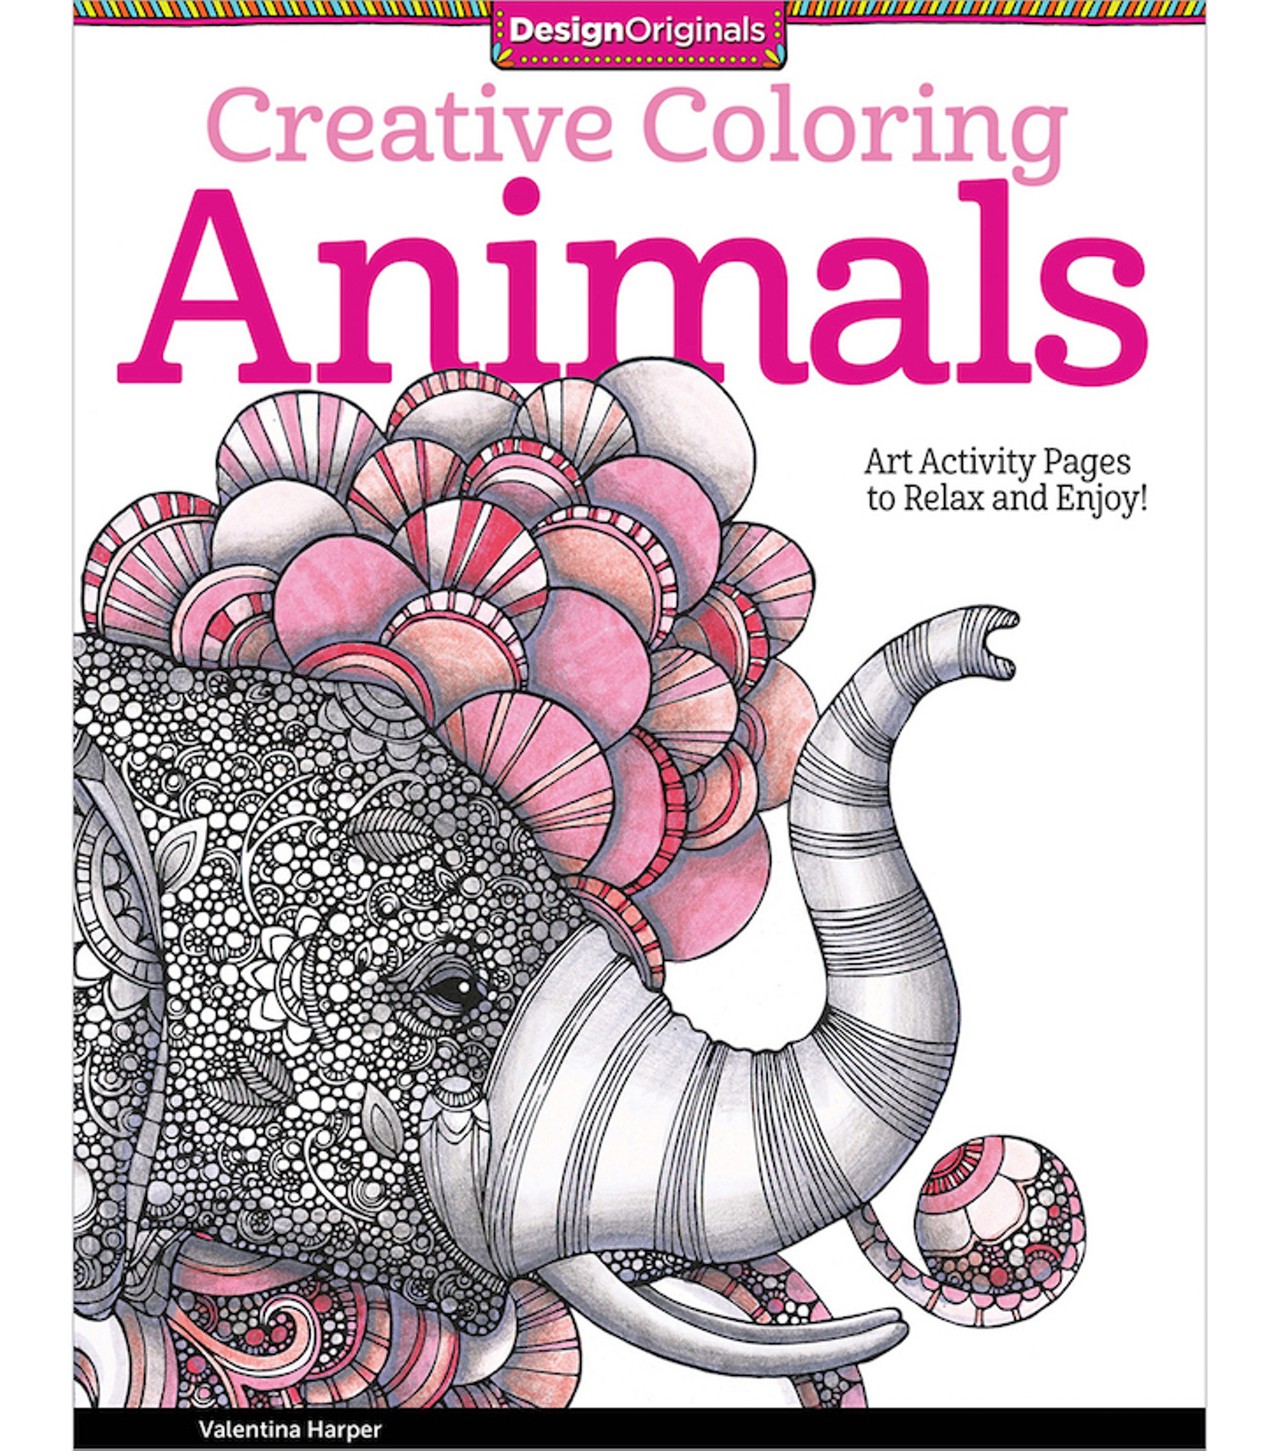  Creative Coloring: Animals
&#147;From owls and elephants to peacocks and armadillos, these elegant beasts are so richly detailed it might take you hours to complete just one page.&#148;
Buy it at 123stitch.com 